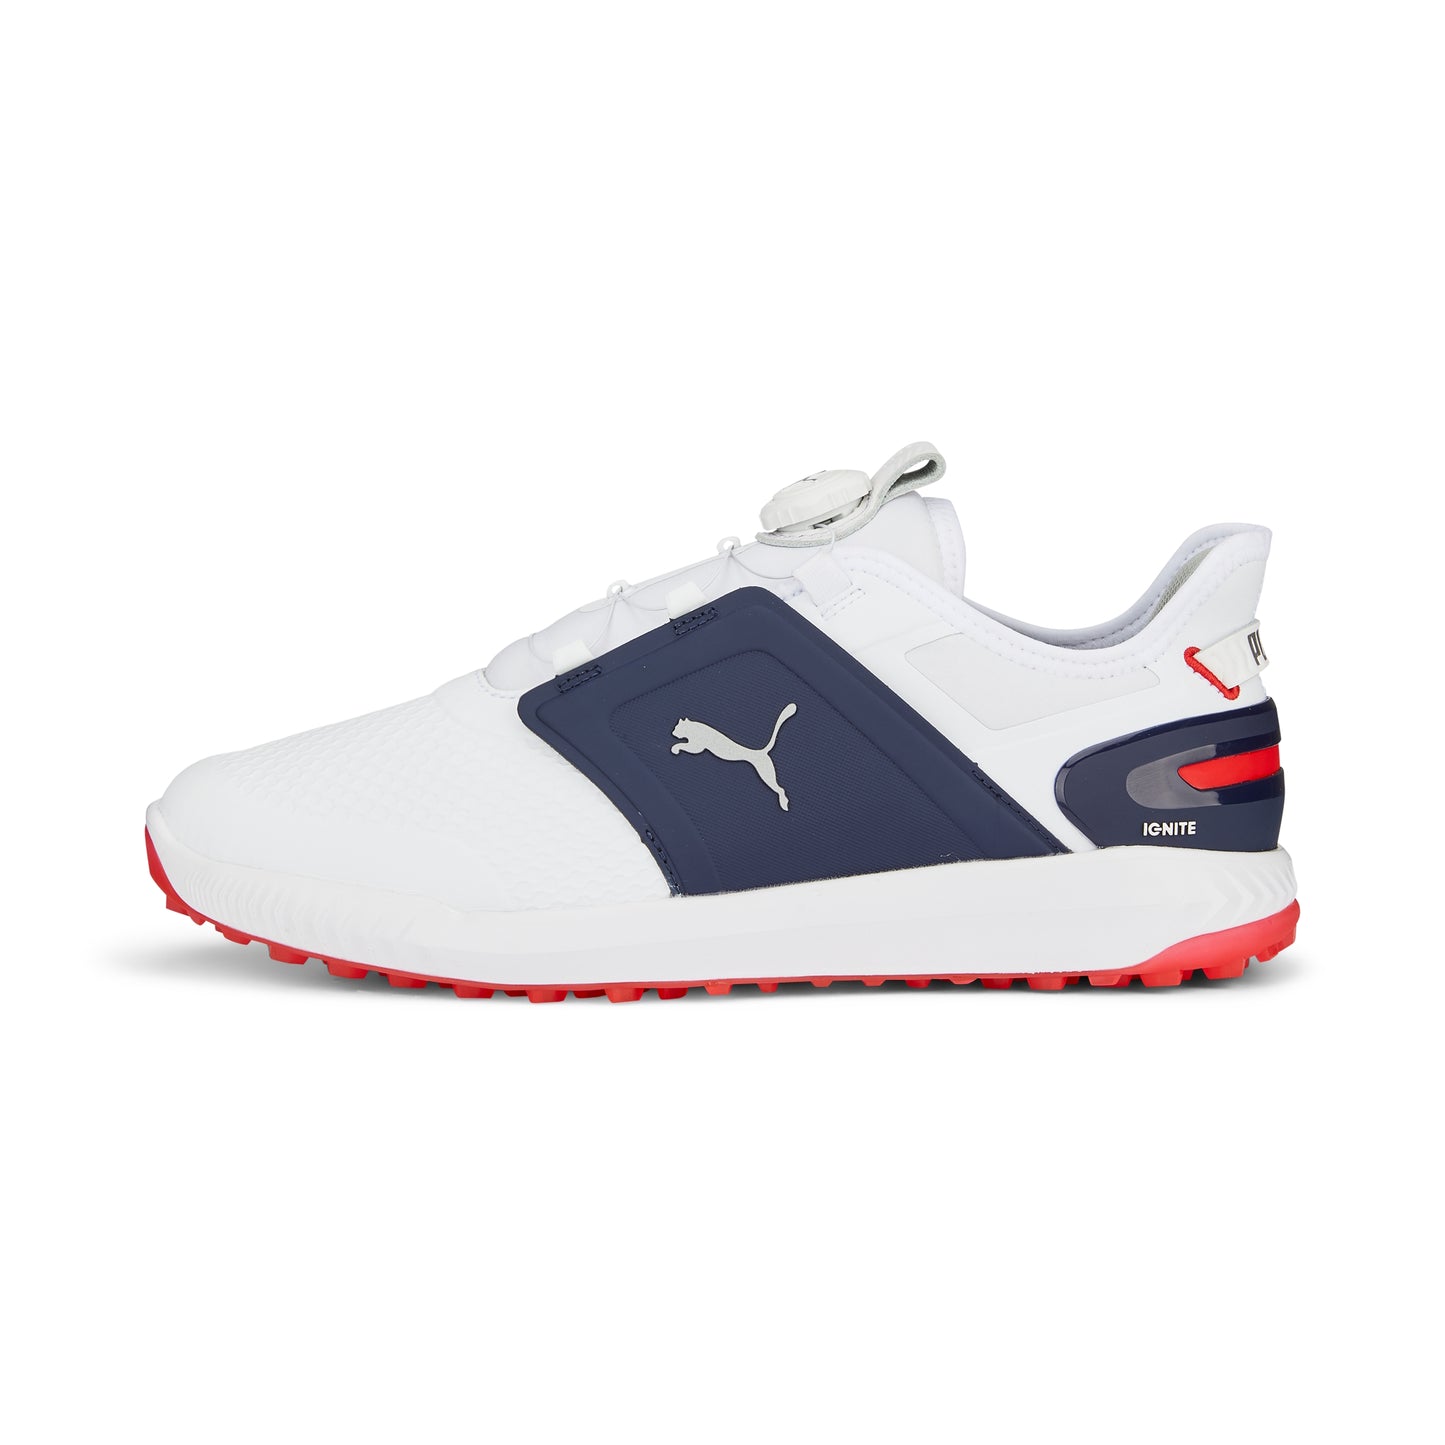 Puma Men's Ignite Elevate Disc Spikeless Golf Shoes - White/Navy